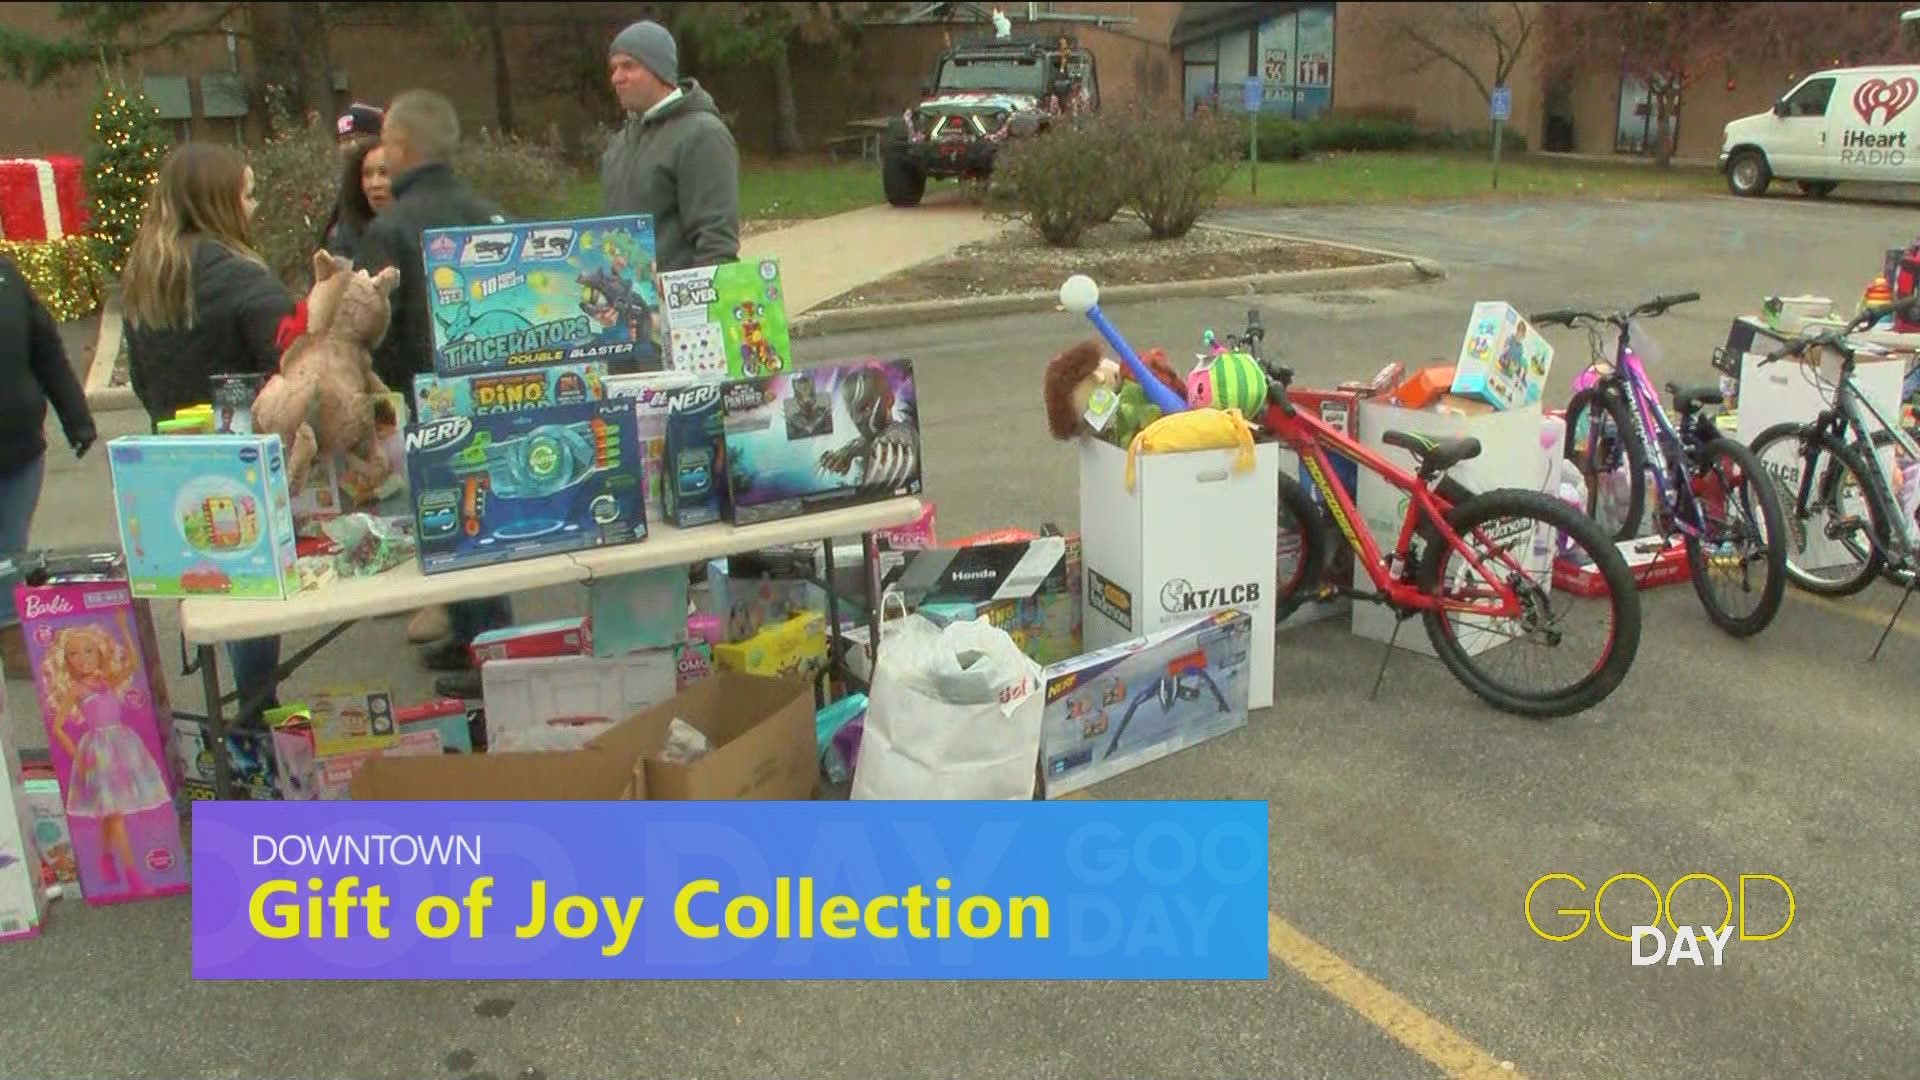 Amanda and Diane wrap up Good Day on WTOL 11 with a check-in on the toys people have donated.